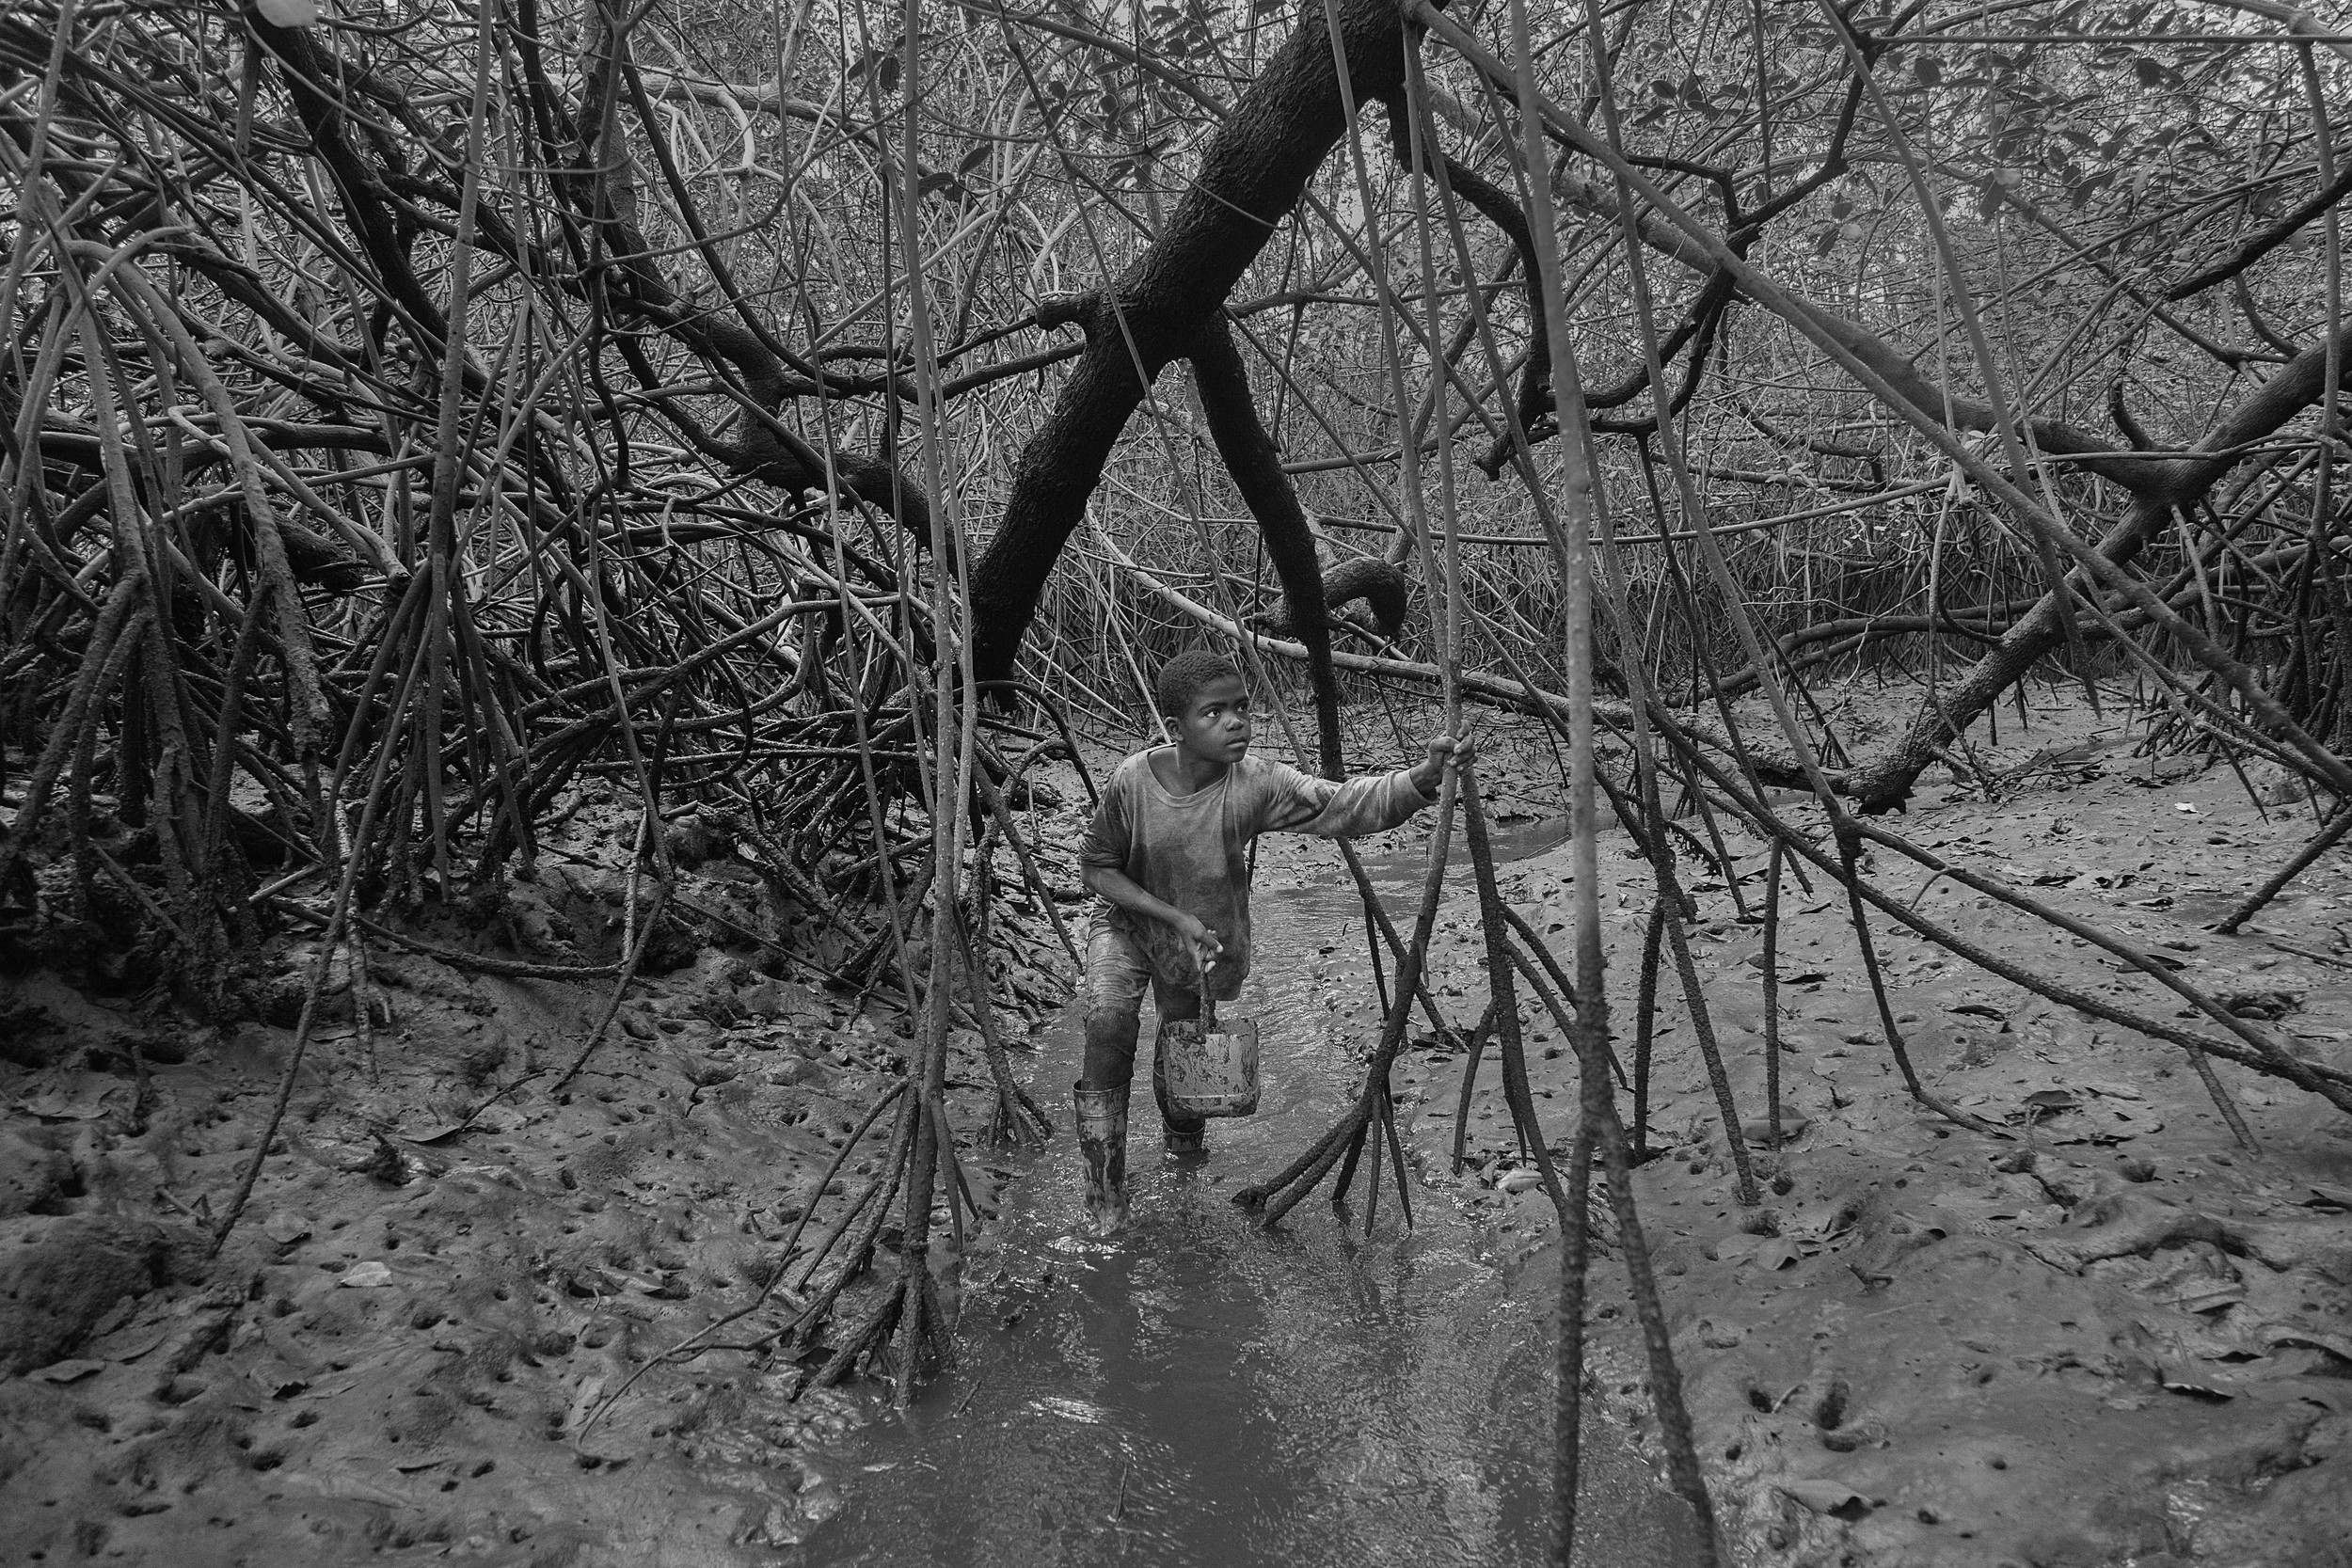  Alex Ocampo walks through a water inlet in the mangrove reserve. Shell pickers are used to work and walk waist deep in the mangrove. Most outsiders will invariably get stuck in the mud and have to get dragged out. 2014. 